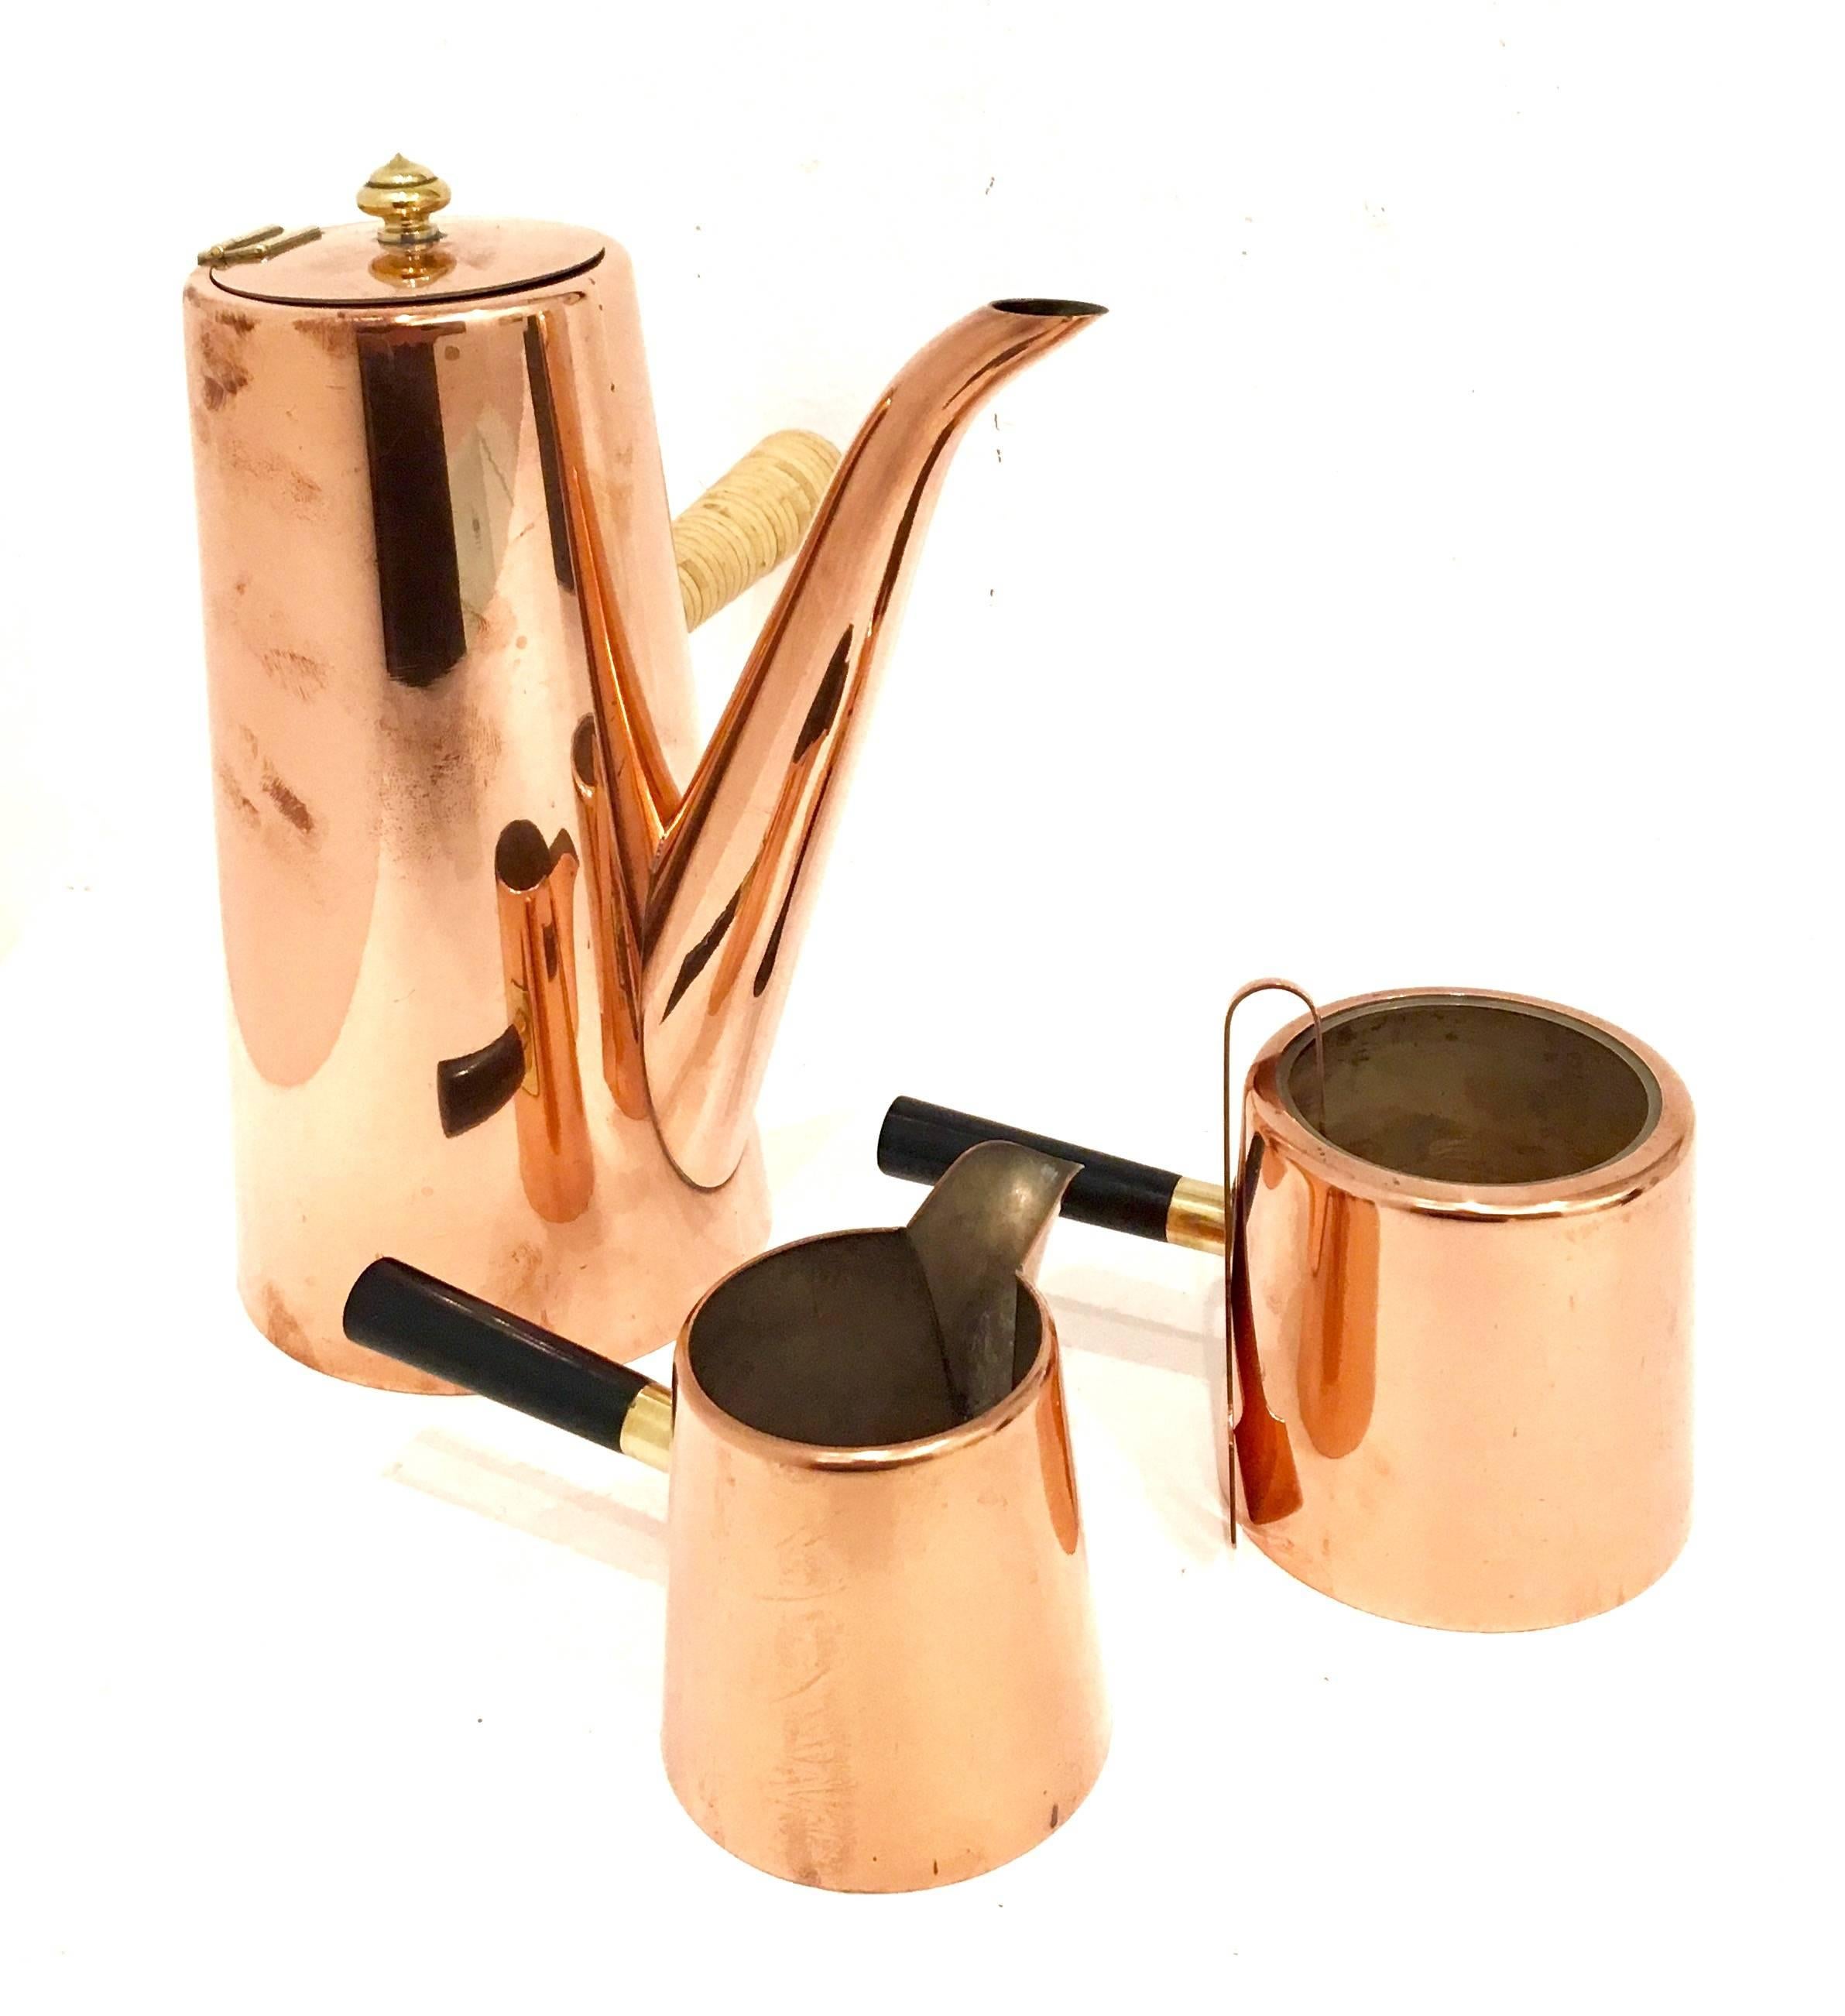 Elegant coffee set with cane handle in polished copper with sugar and creamer bowl, circa 1950s, comes with sugar tongs. With brass fittings and bakelite handles.